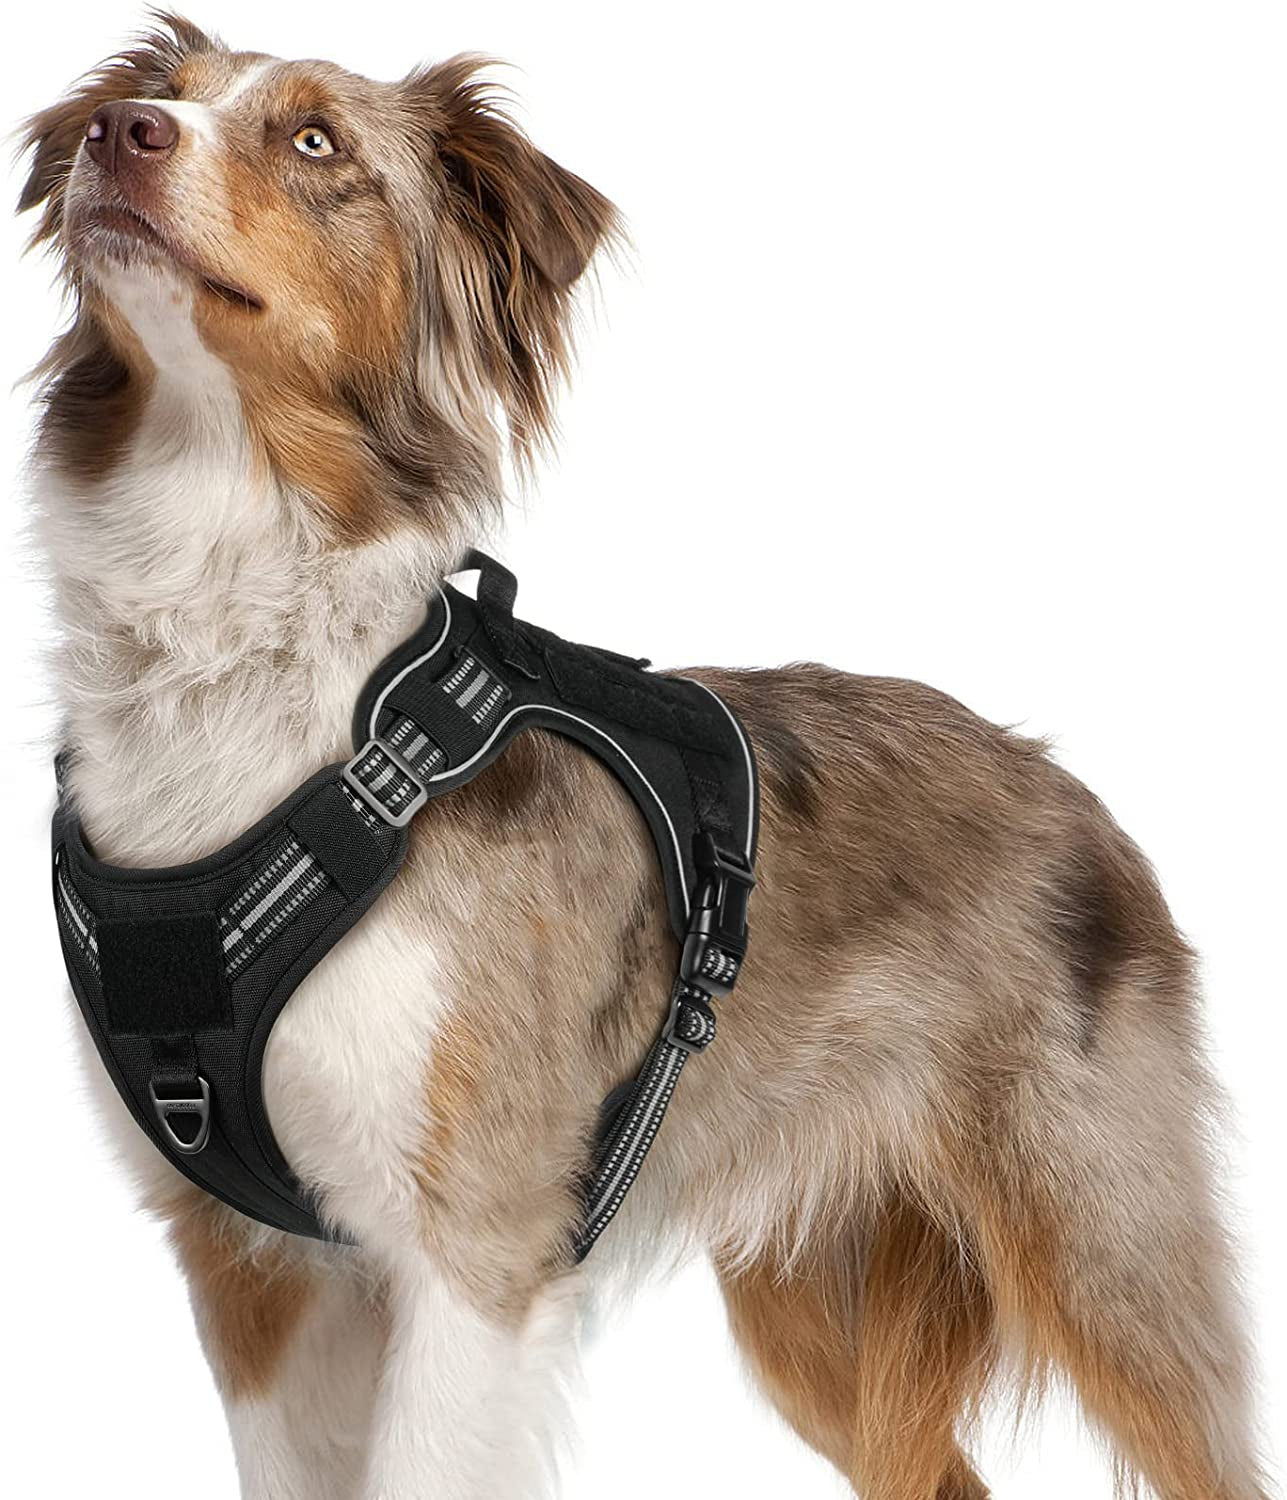 Rabbitgoo Tactical Dog Harness No Pull, Military Dog Vest Harness with Handle & Molle, Easy Control Service Dog Harness for Large Dogs Training Walking, Adjustable Reflective Pet Harness, Black, L Animals & Pet Supplies > Pet Supplies > Dog Supplies > Dog Apparel GLOBEGOU CO.,LTD Black Medium 